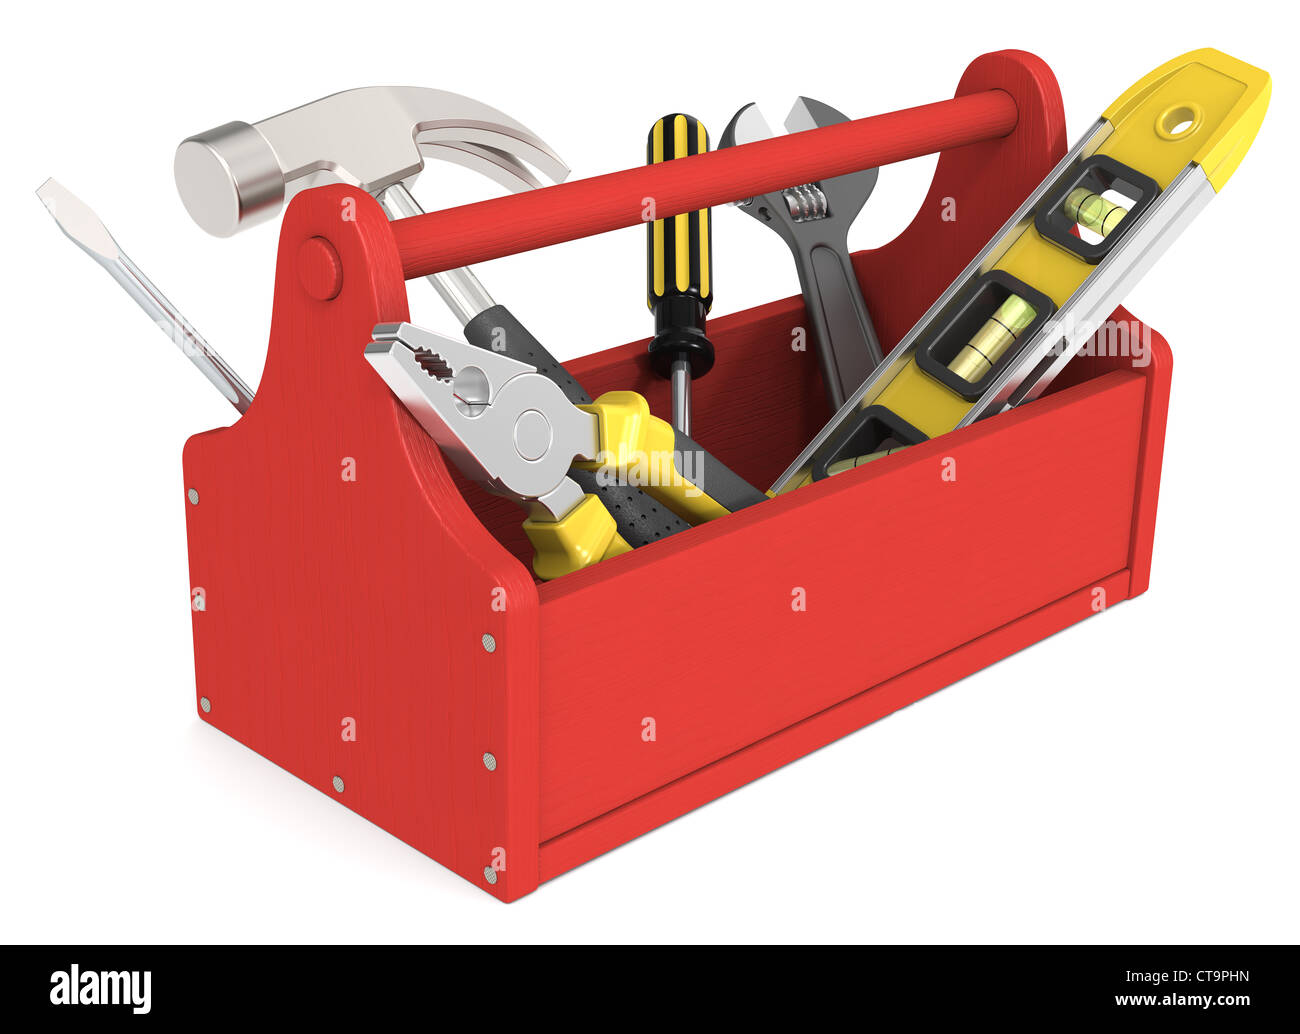 https://c8.alamy.com/comp/CT9PHN/toolbox-of-wood-painted-red-miscellaneous-tools-CT9PHN.jpg